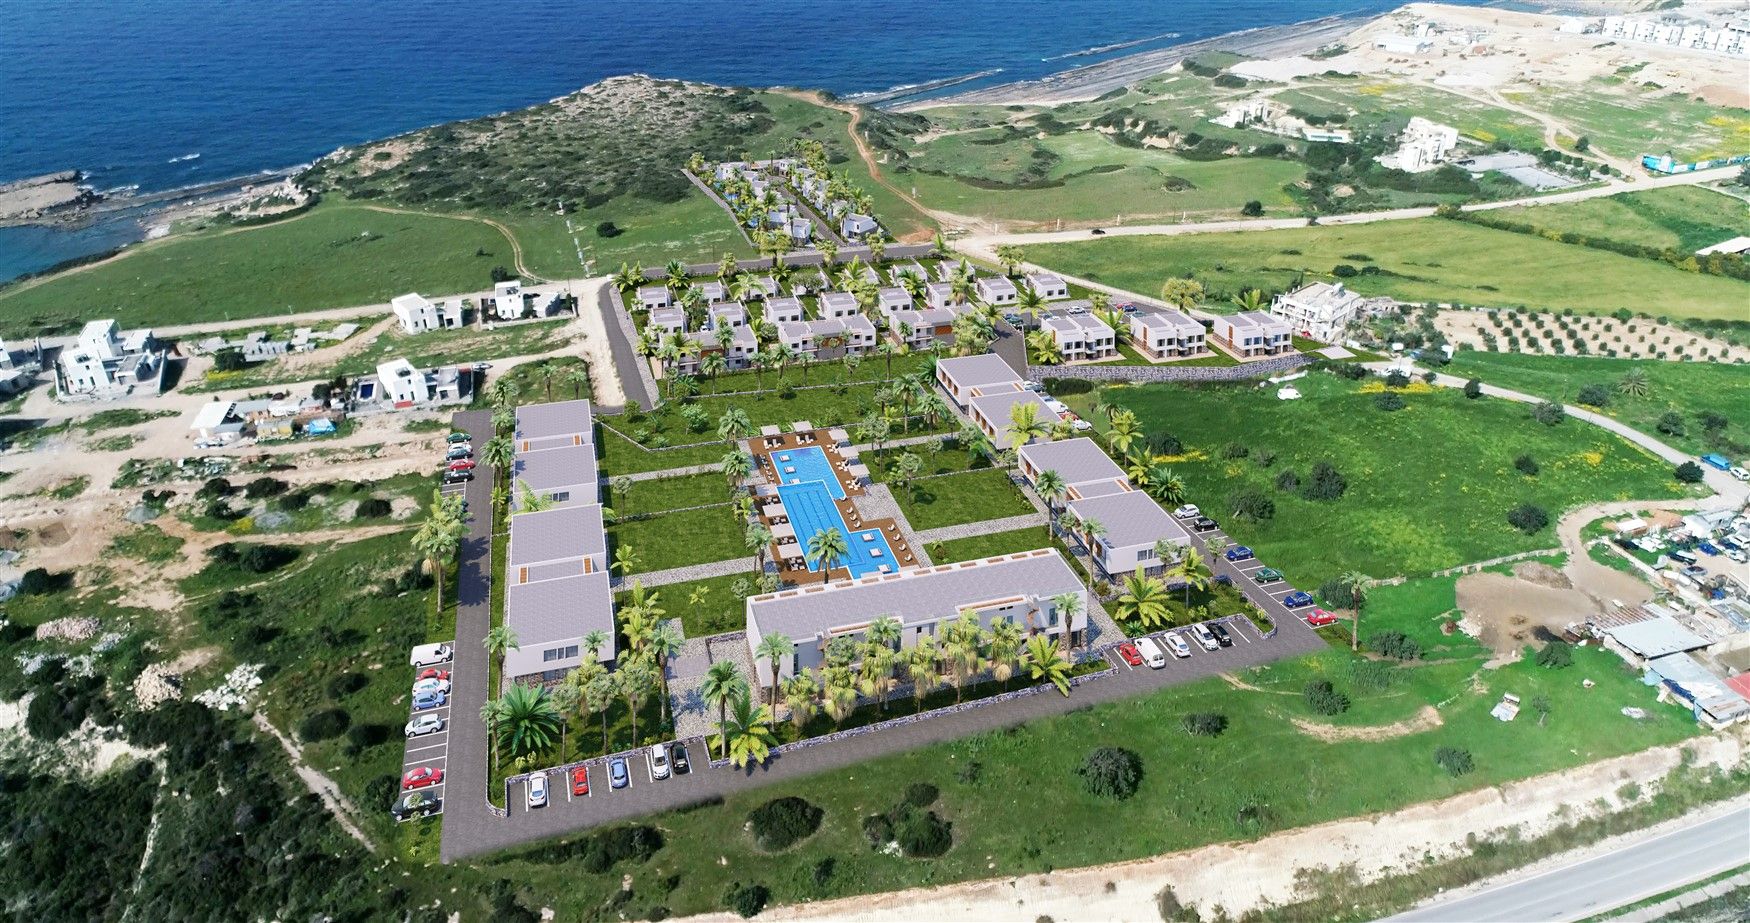 4 bedroom villas in residential complex on the beach - Northern Cyprus